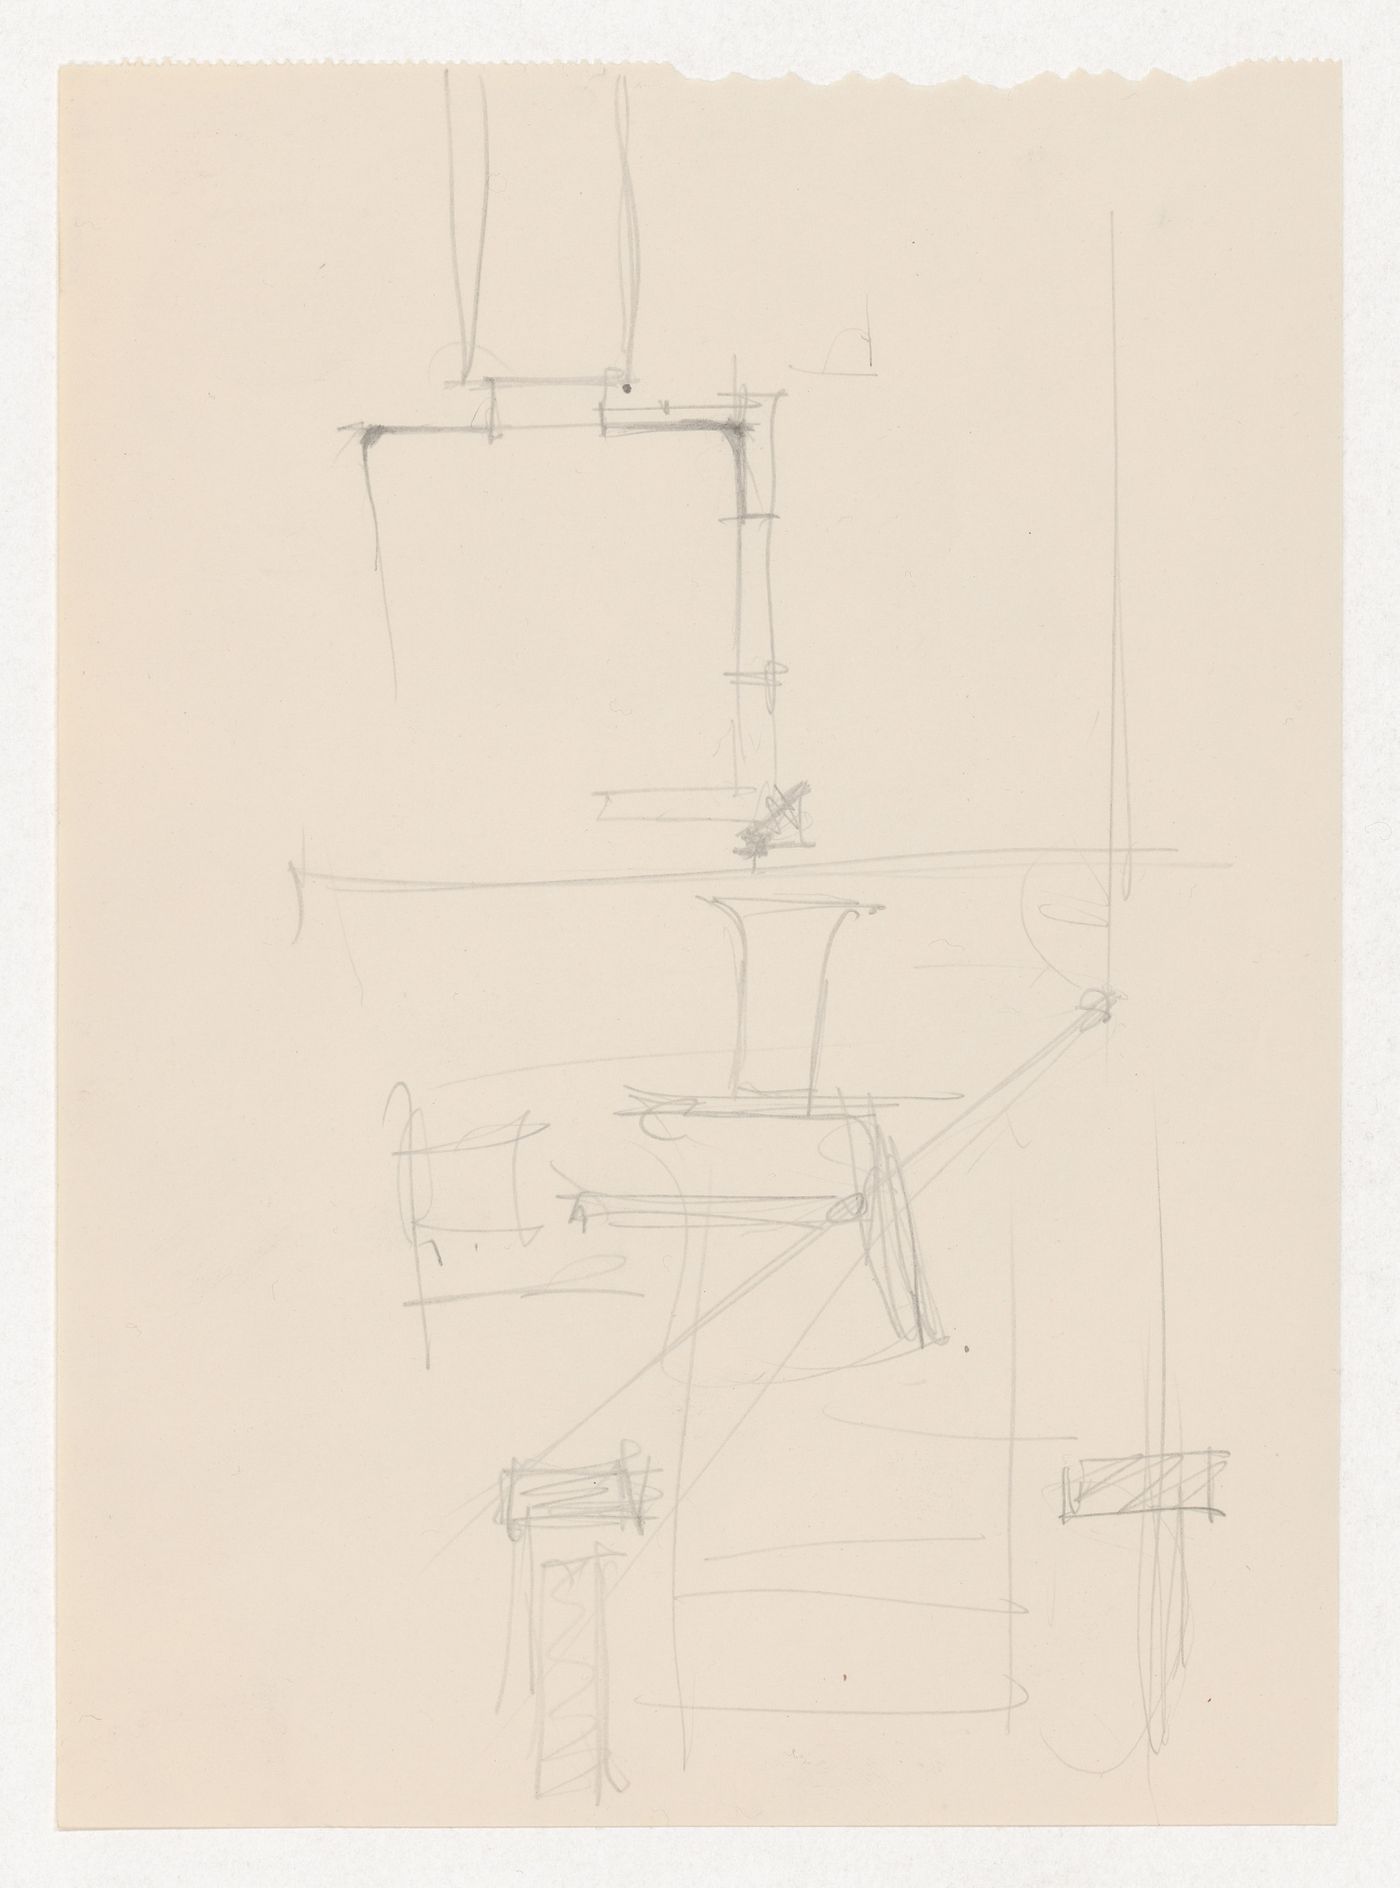 Sketch cross section for column-to-beam connection and unidentified sketches for the Metallurgy Building, Illinois Institute of Technology, Chicago